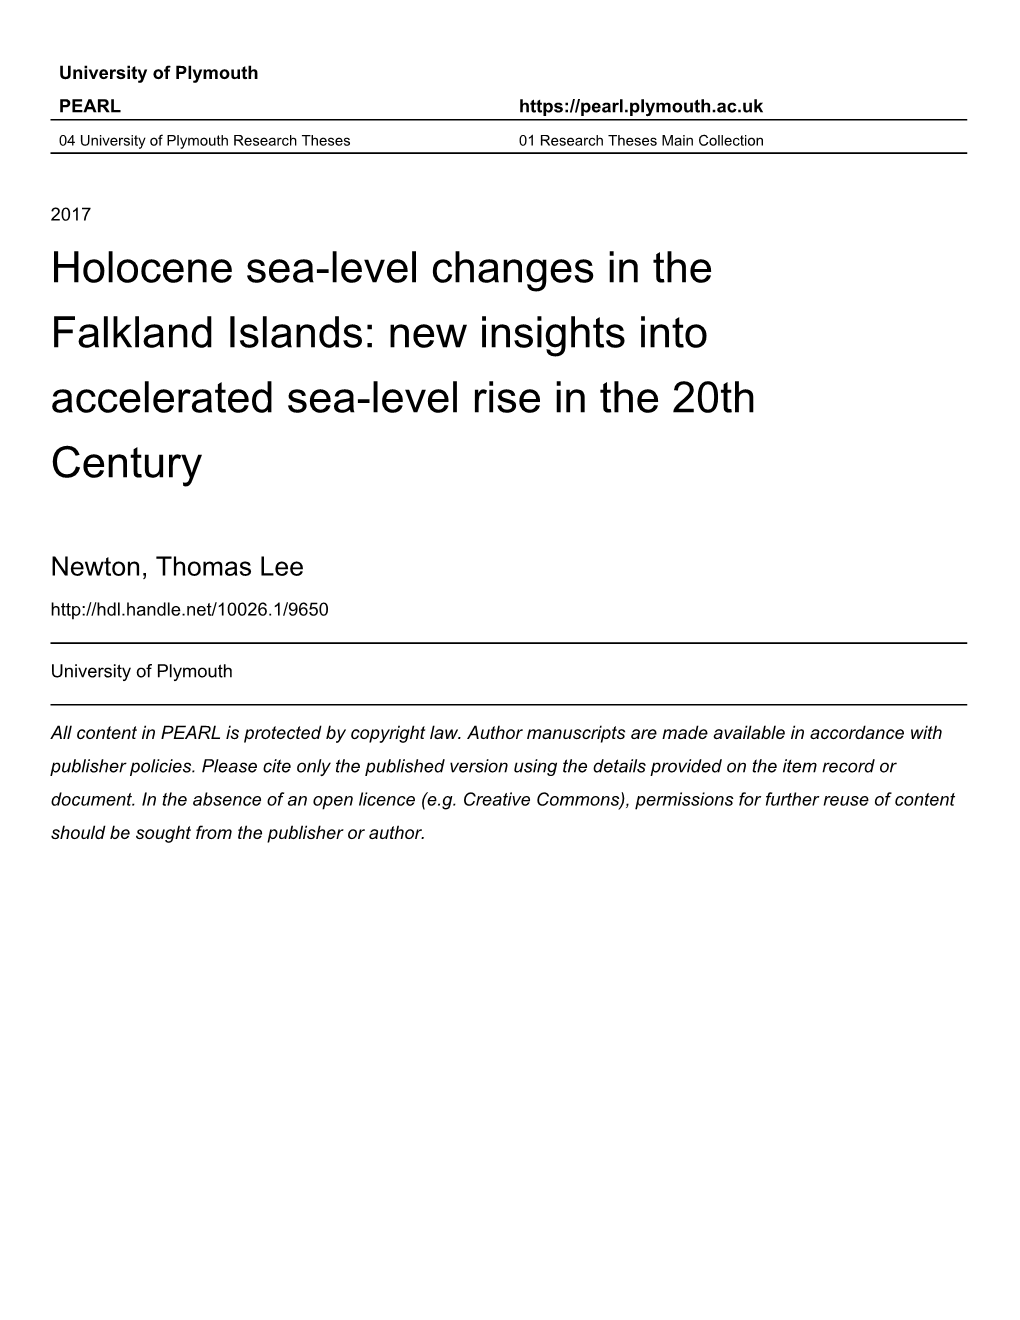 Holocene Sea-Level Changes in the Falkland Islands: New Insights Into Accelerated Sea-Level Rise in the 20Th Century